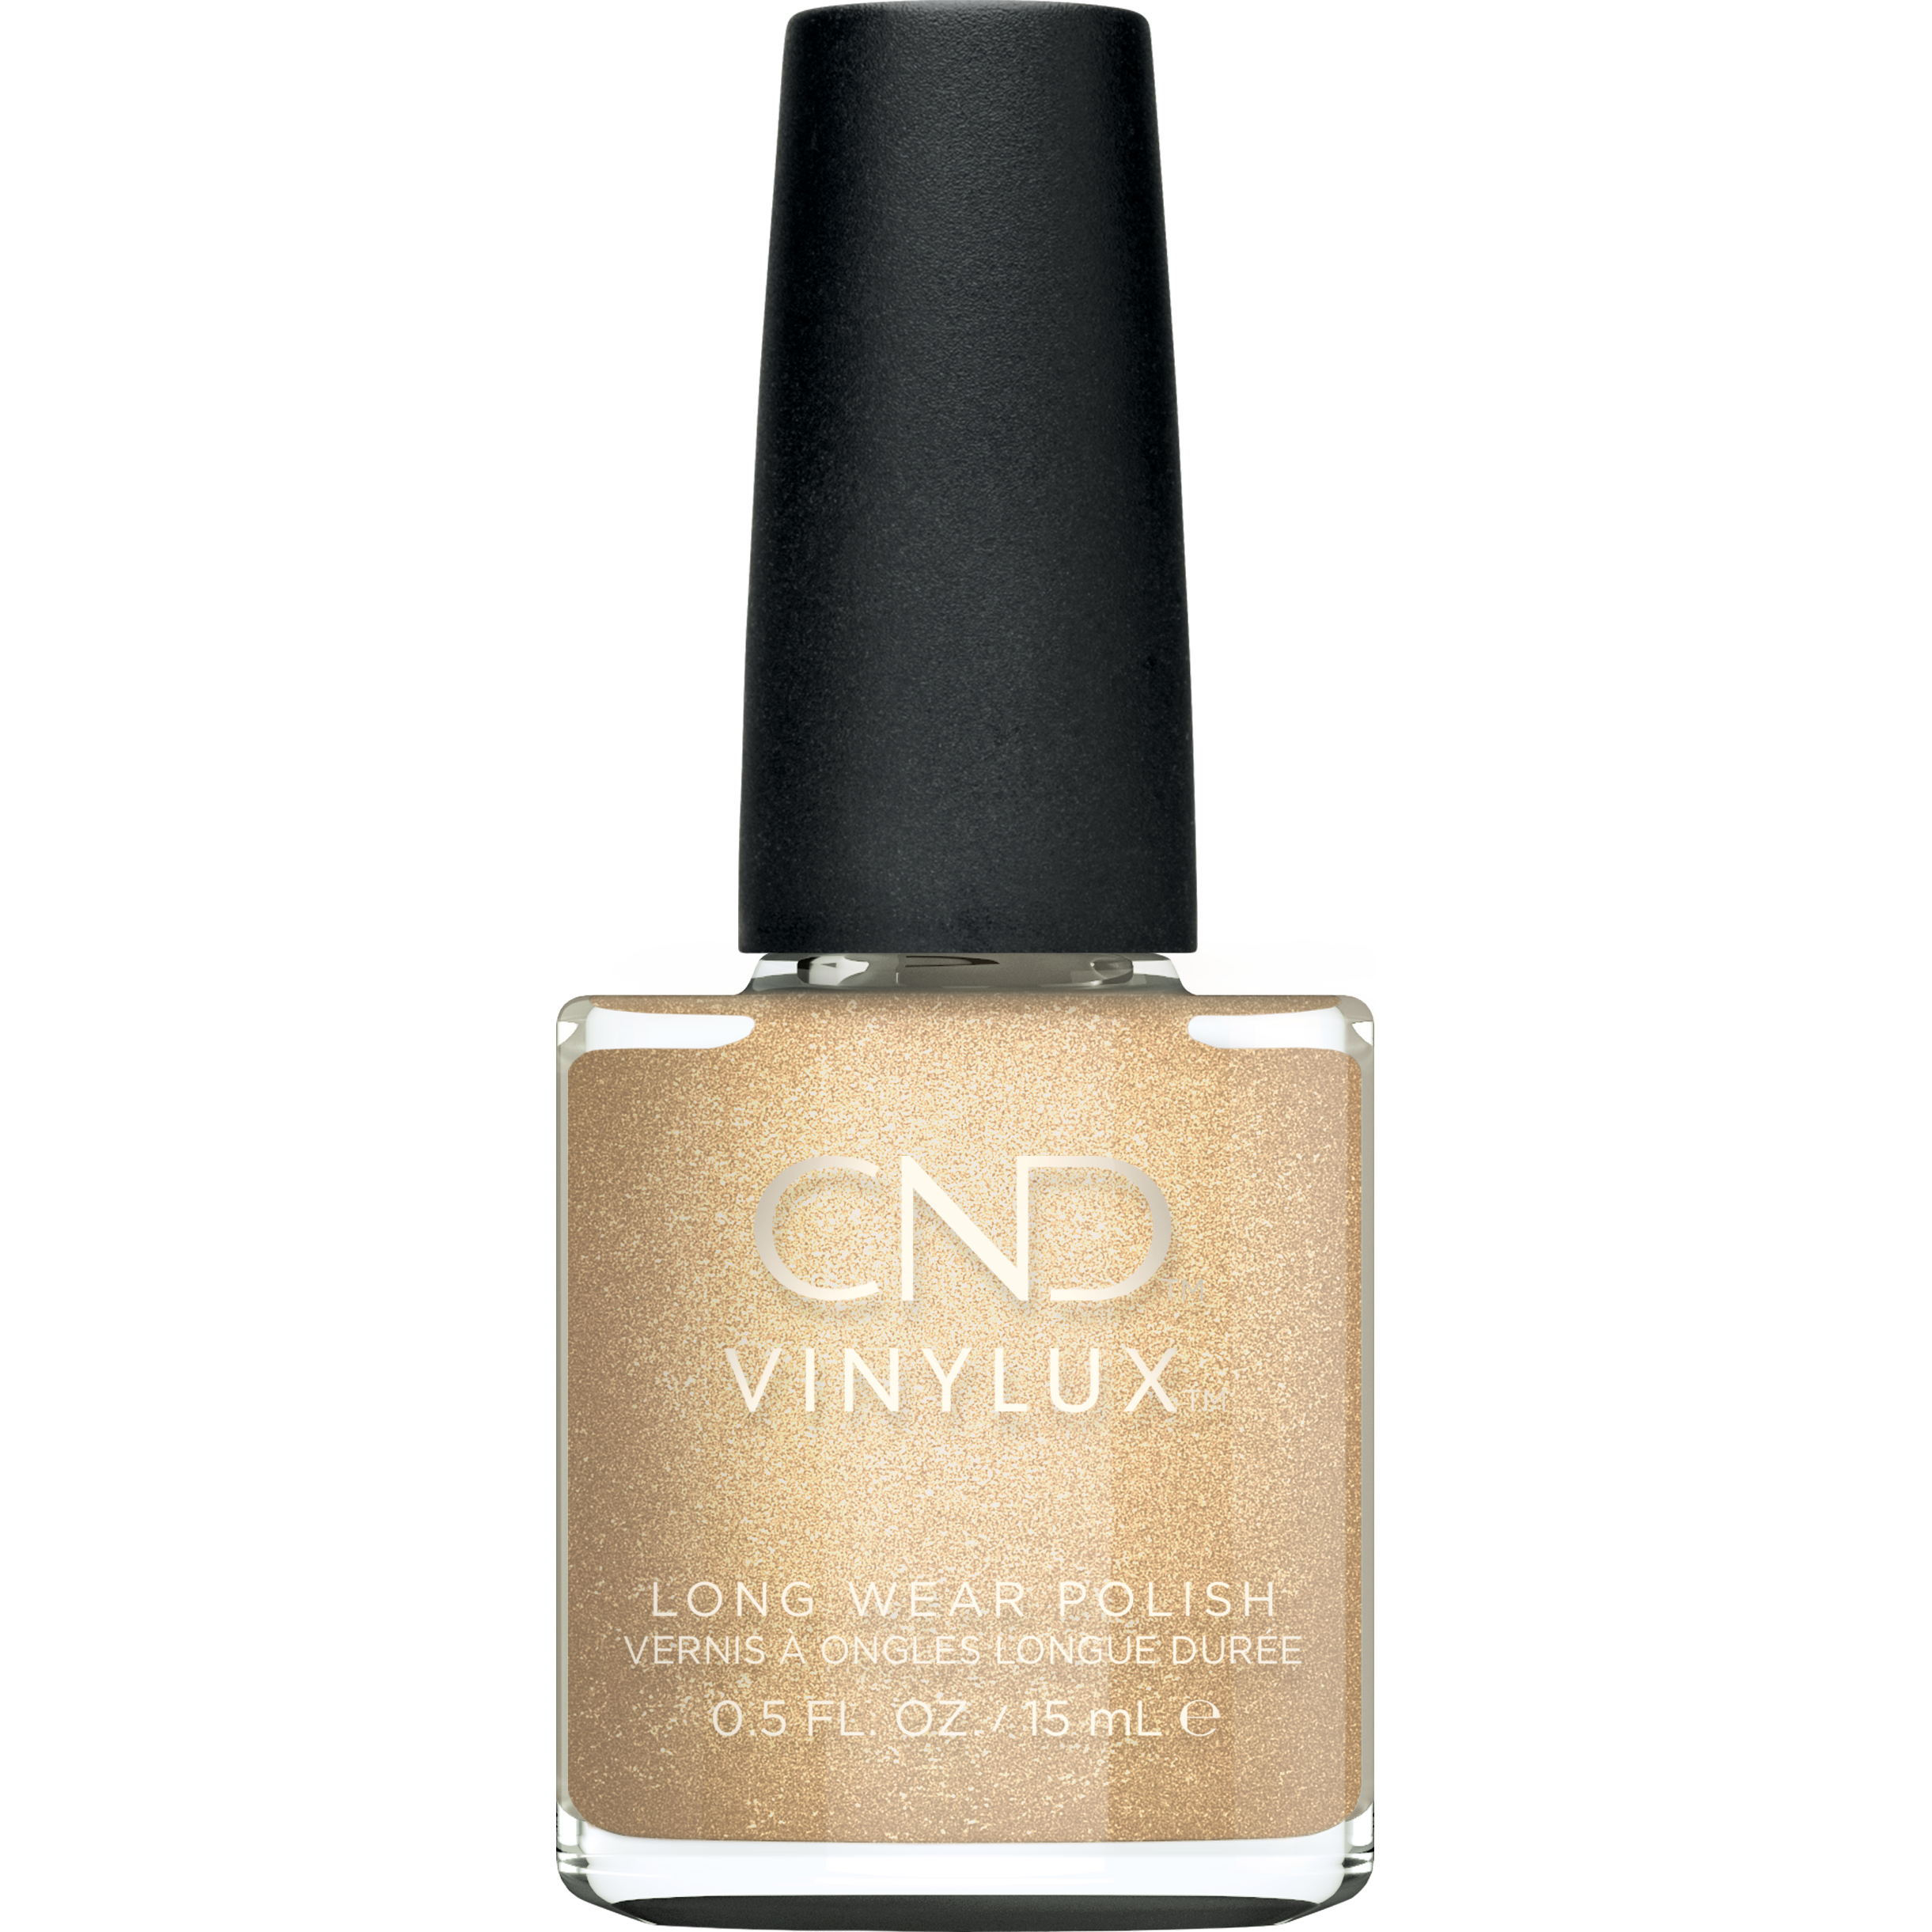 Bilde av Cnd Vinylux Cocktail Couture Collection Long Wear Polish Get That Gold